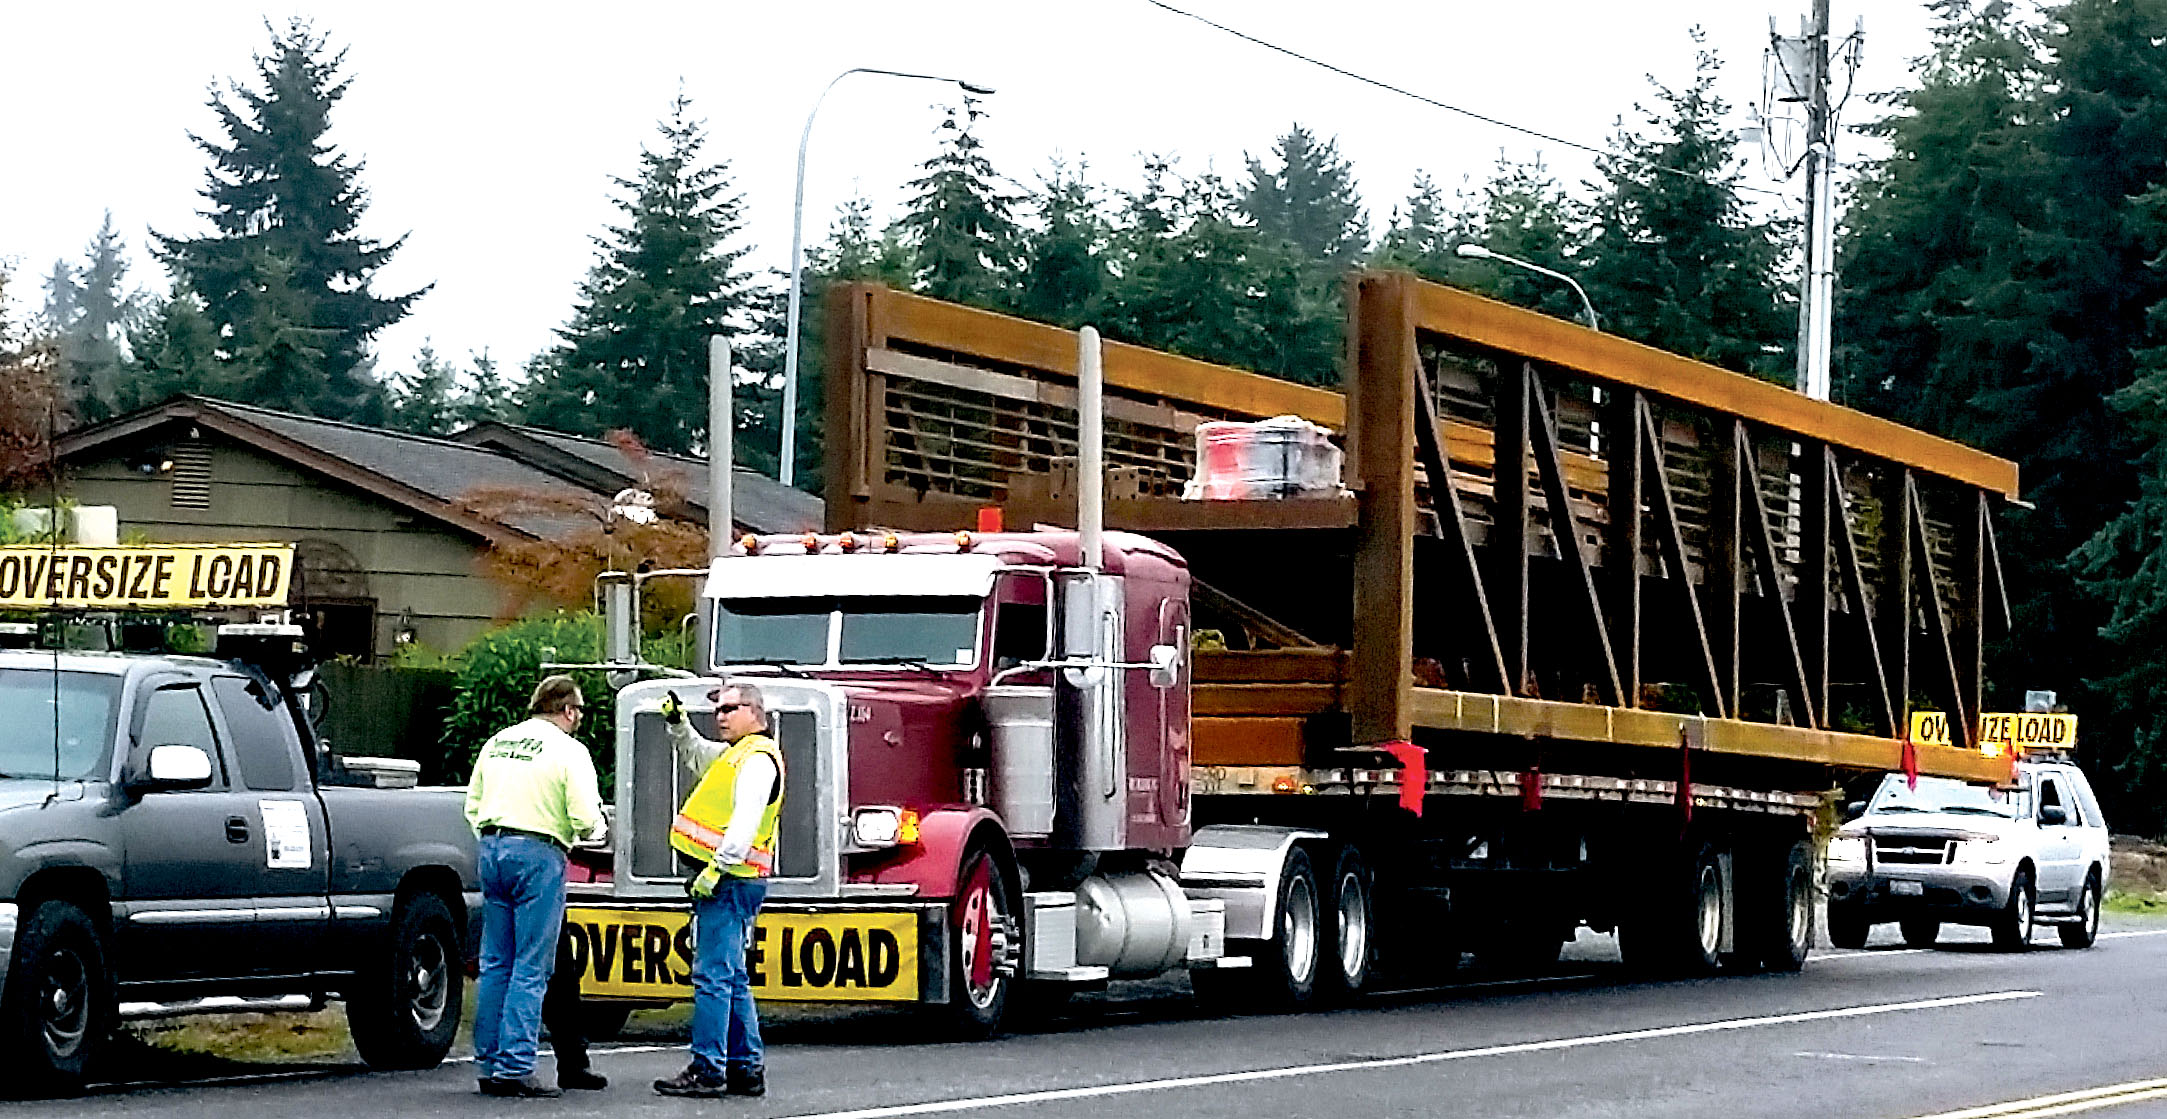 Five new steel sections of the Dungeness River Railroad Bridge trestle started arriving by flatbed truck last week. They are being made in Minnesota and transported to the trestle reconstruction site's west end via East Runnion Road. Larry Jeffryes